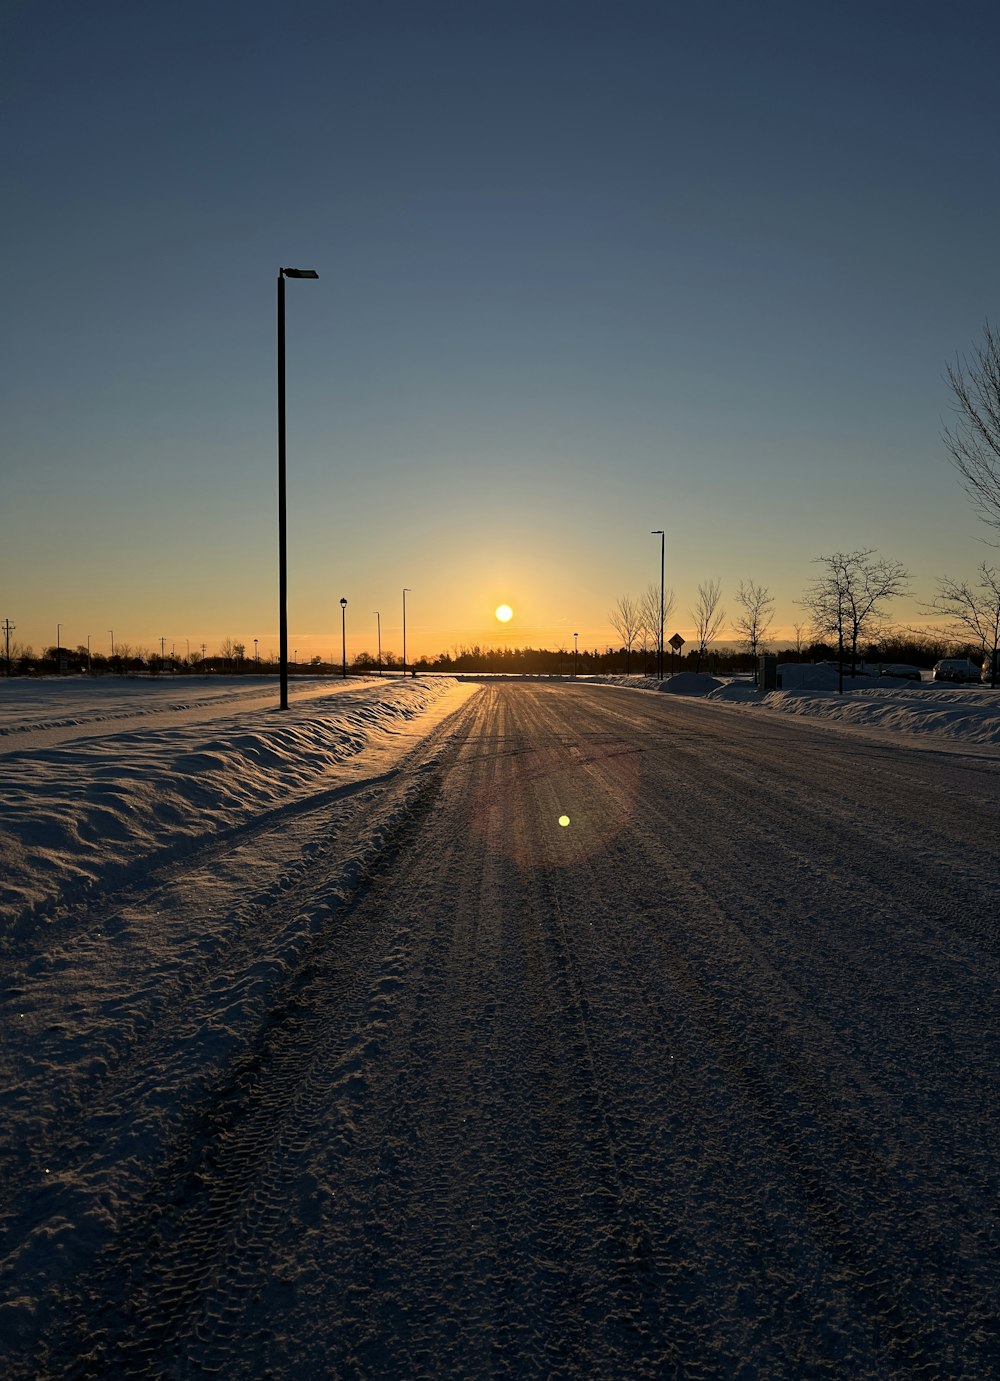 the sun is setting over a snowy road